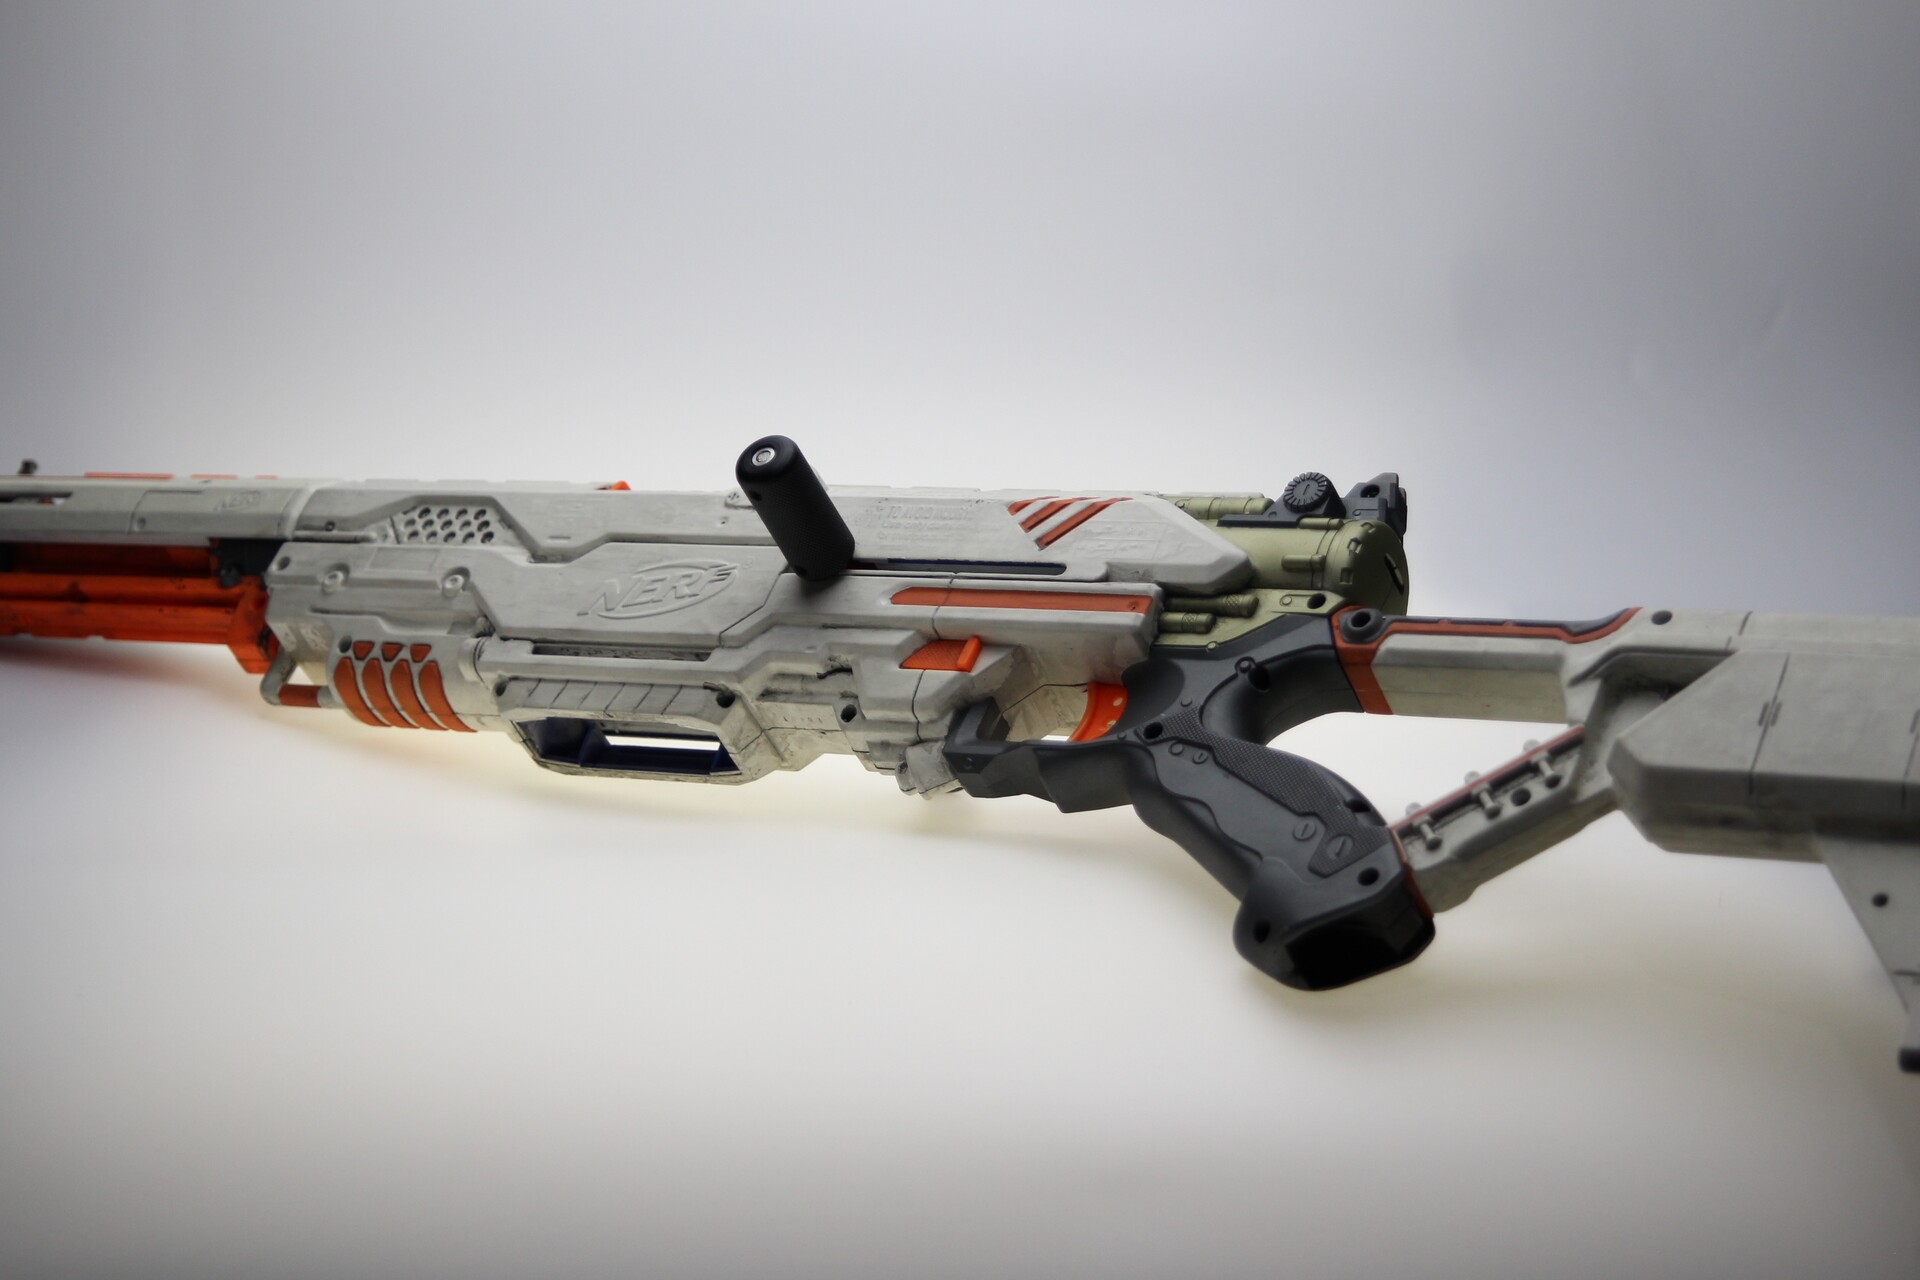 Nerf longstrike repaint and mod services